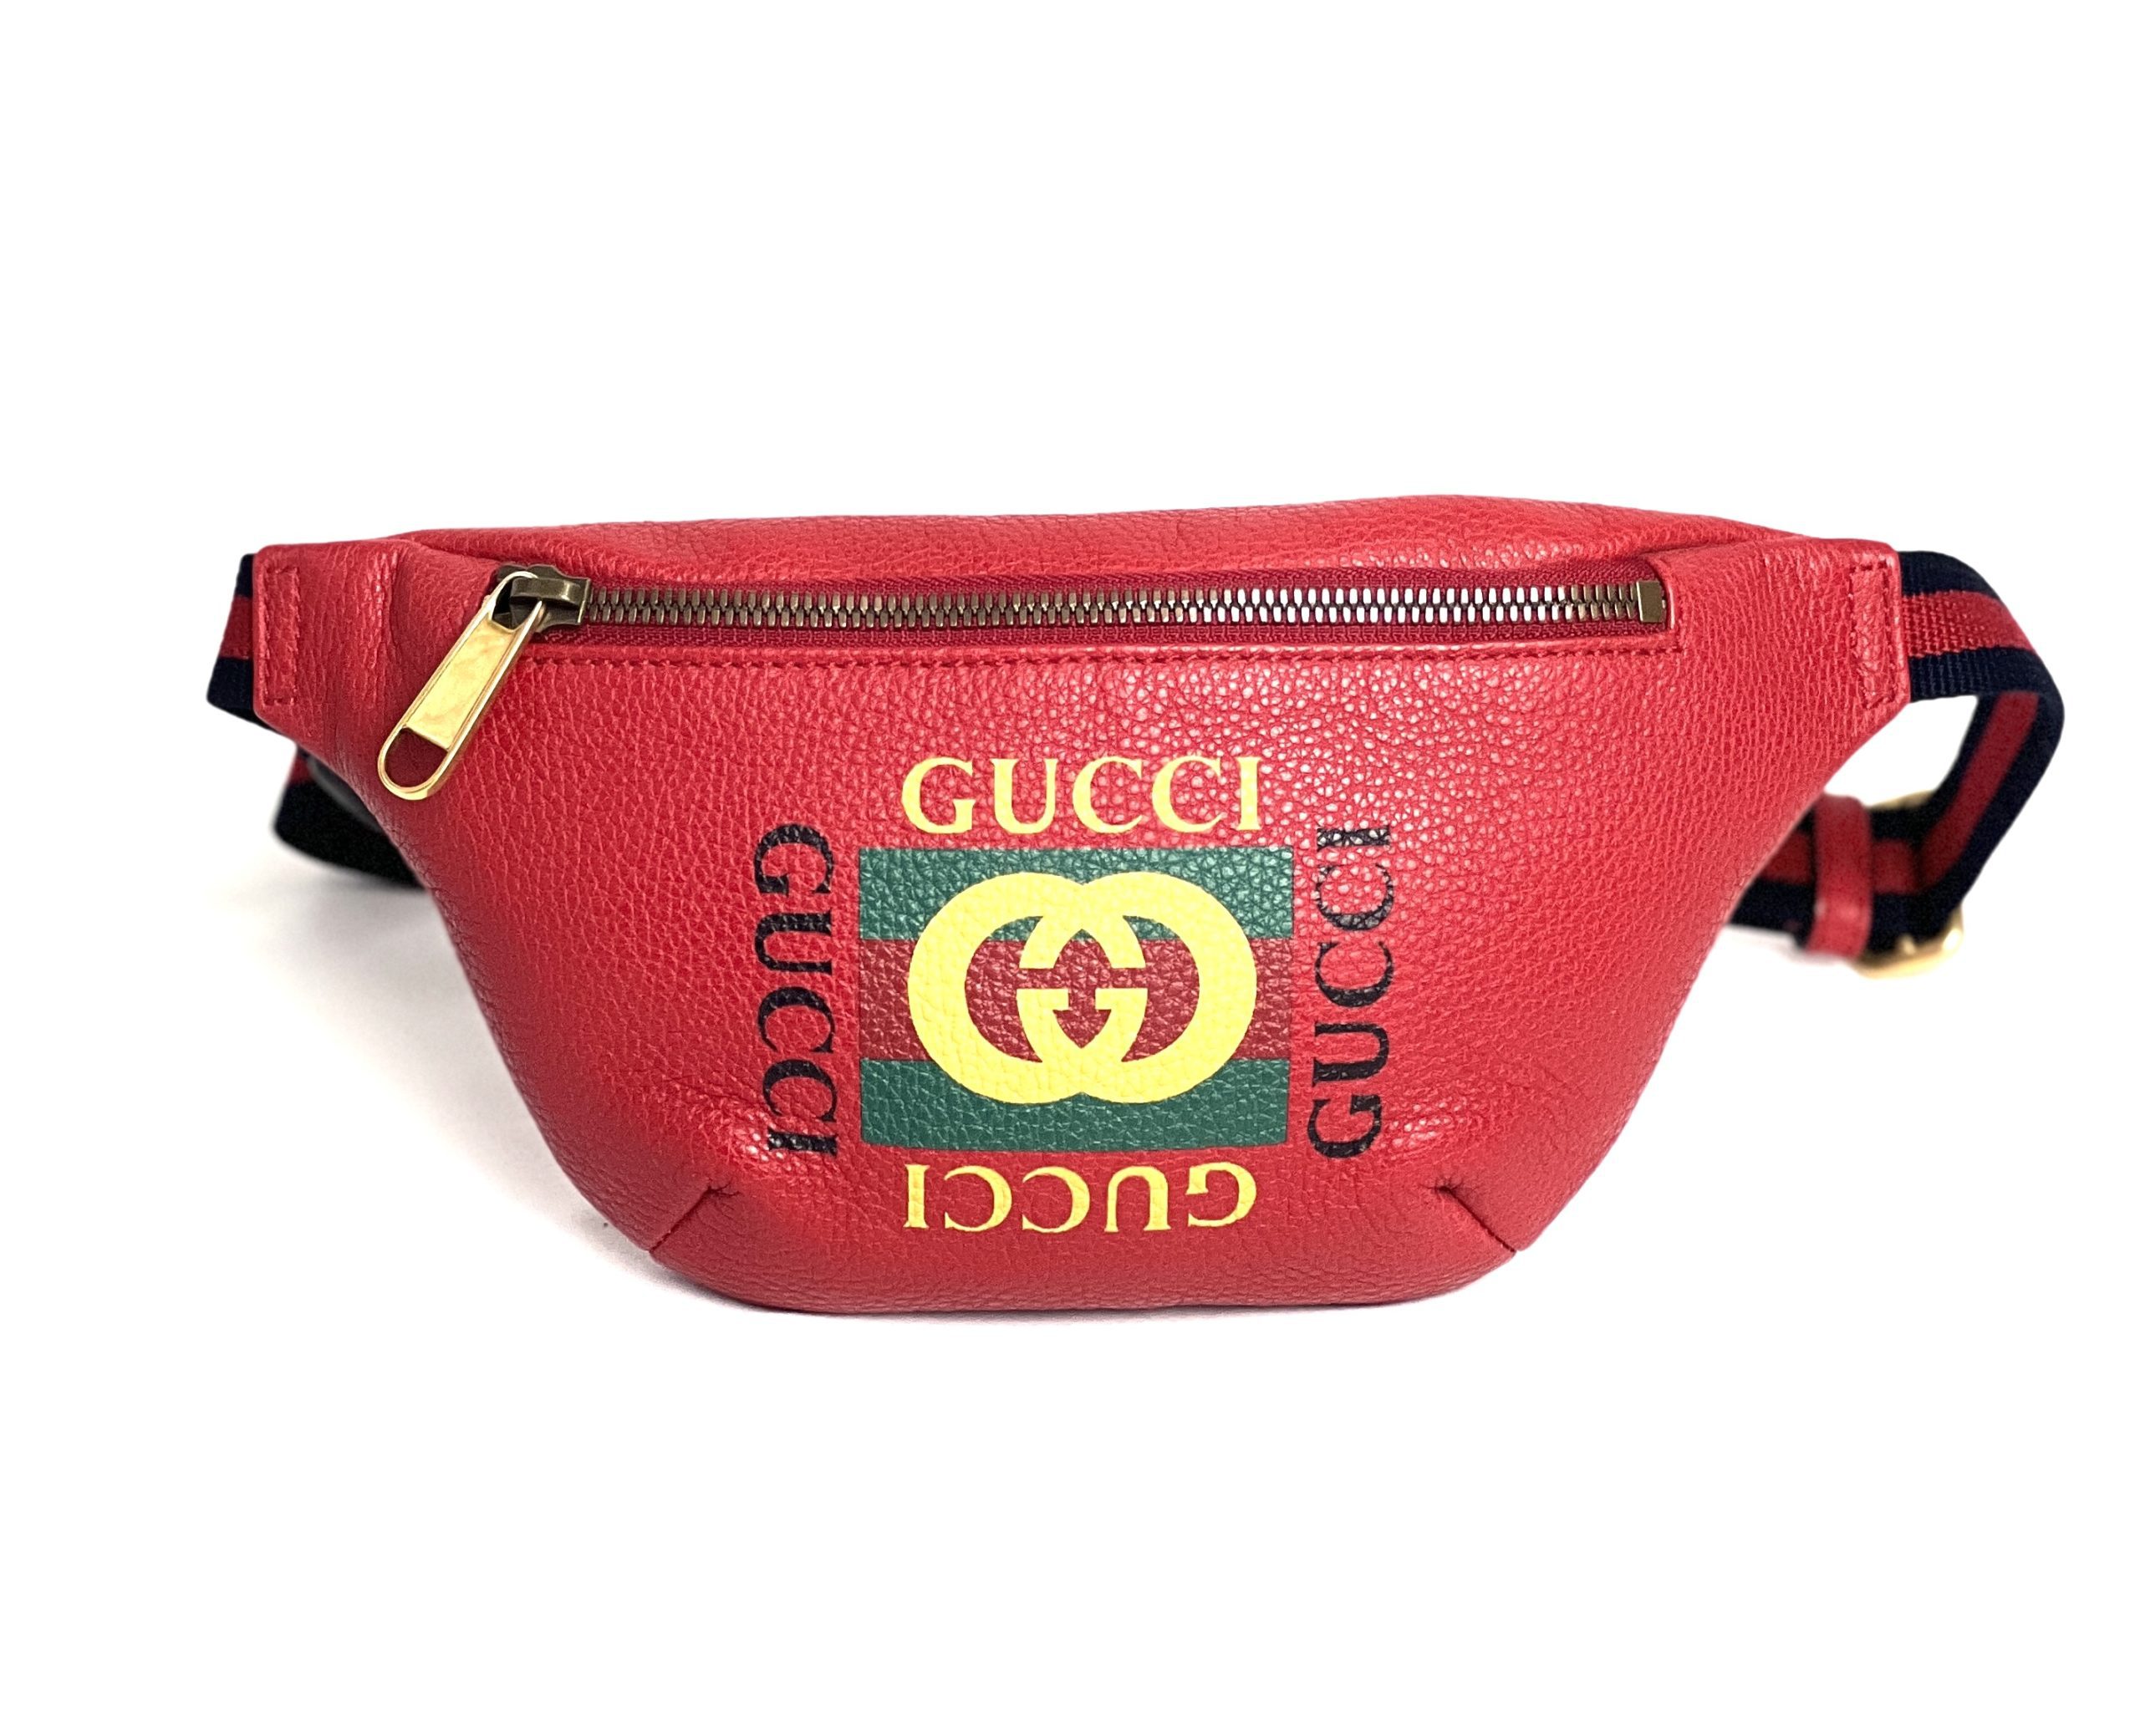 New Authentic Gucci Logo Small Belt Bag Crossbody Red 95 Unisex